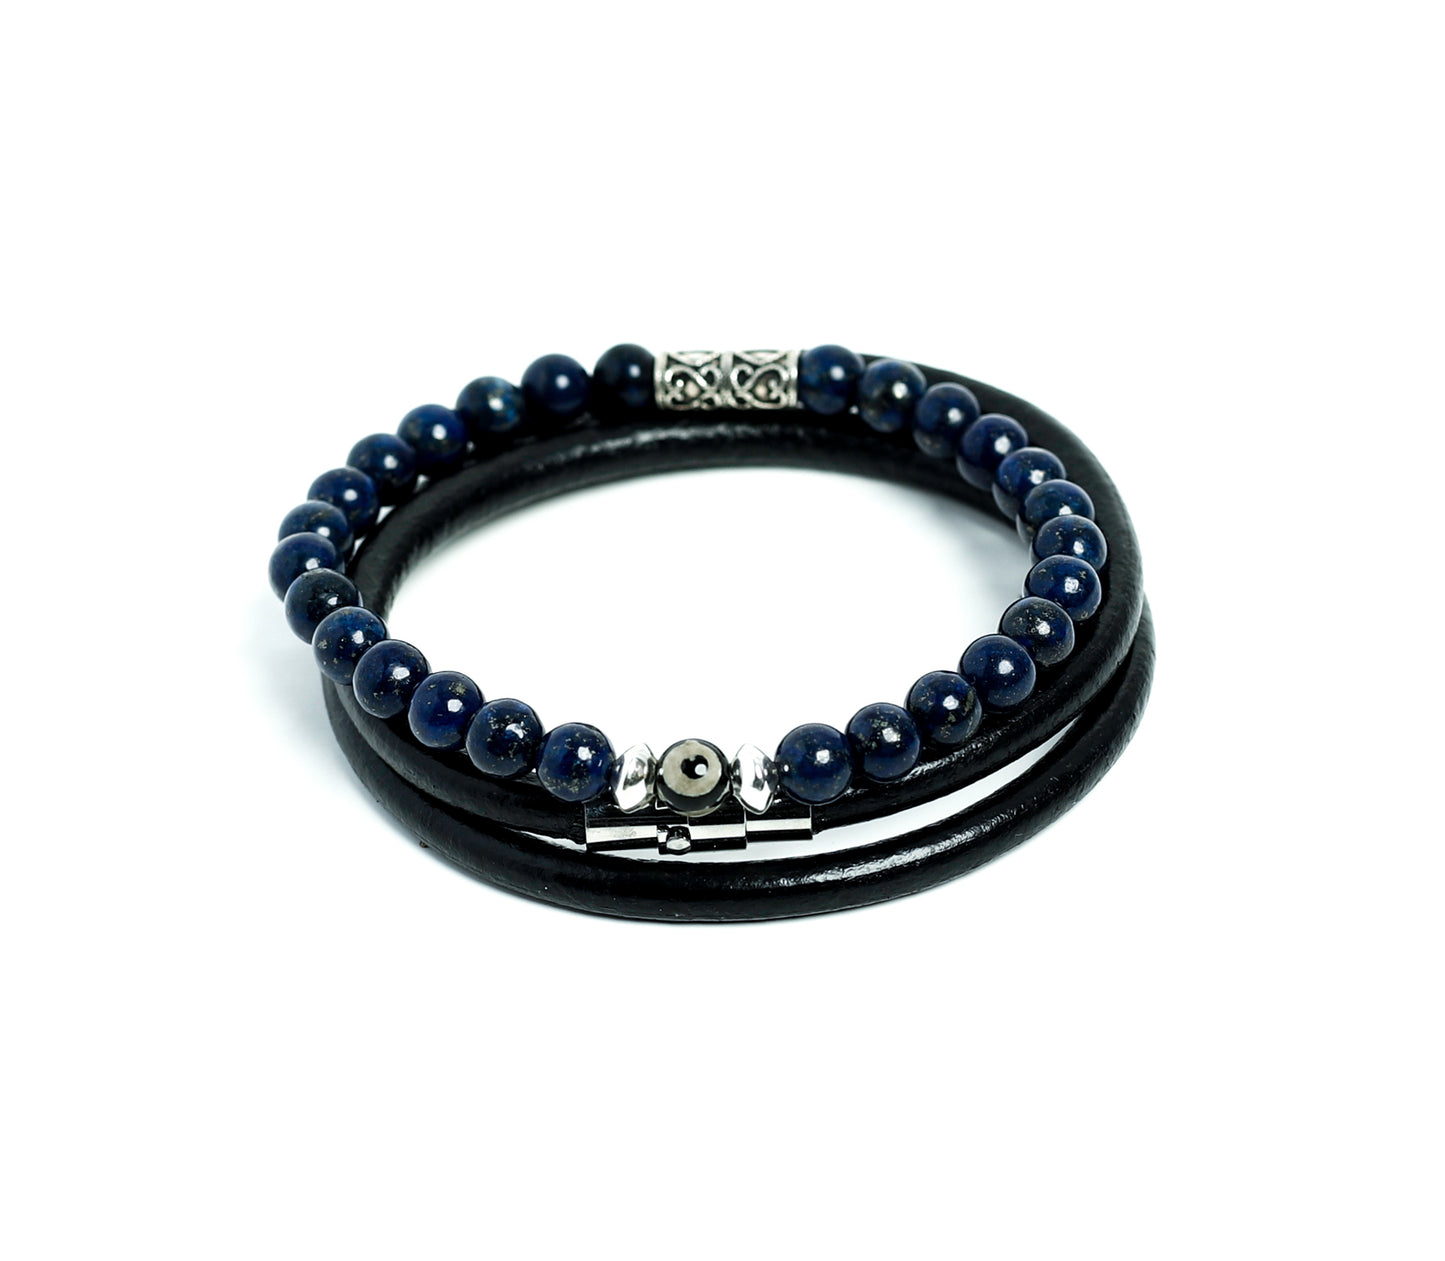 Mens Beaded and Leather Bracelet Set Lapis Lazuli stone Silver Charms handmade at RM Kandy